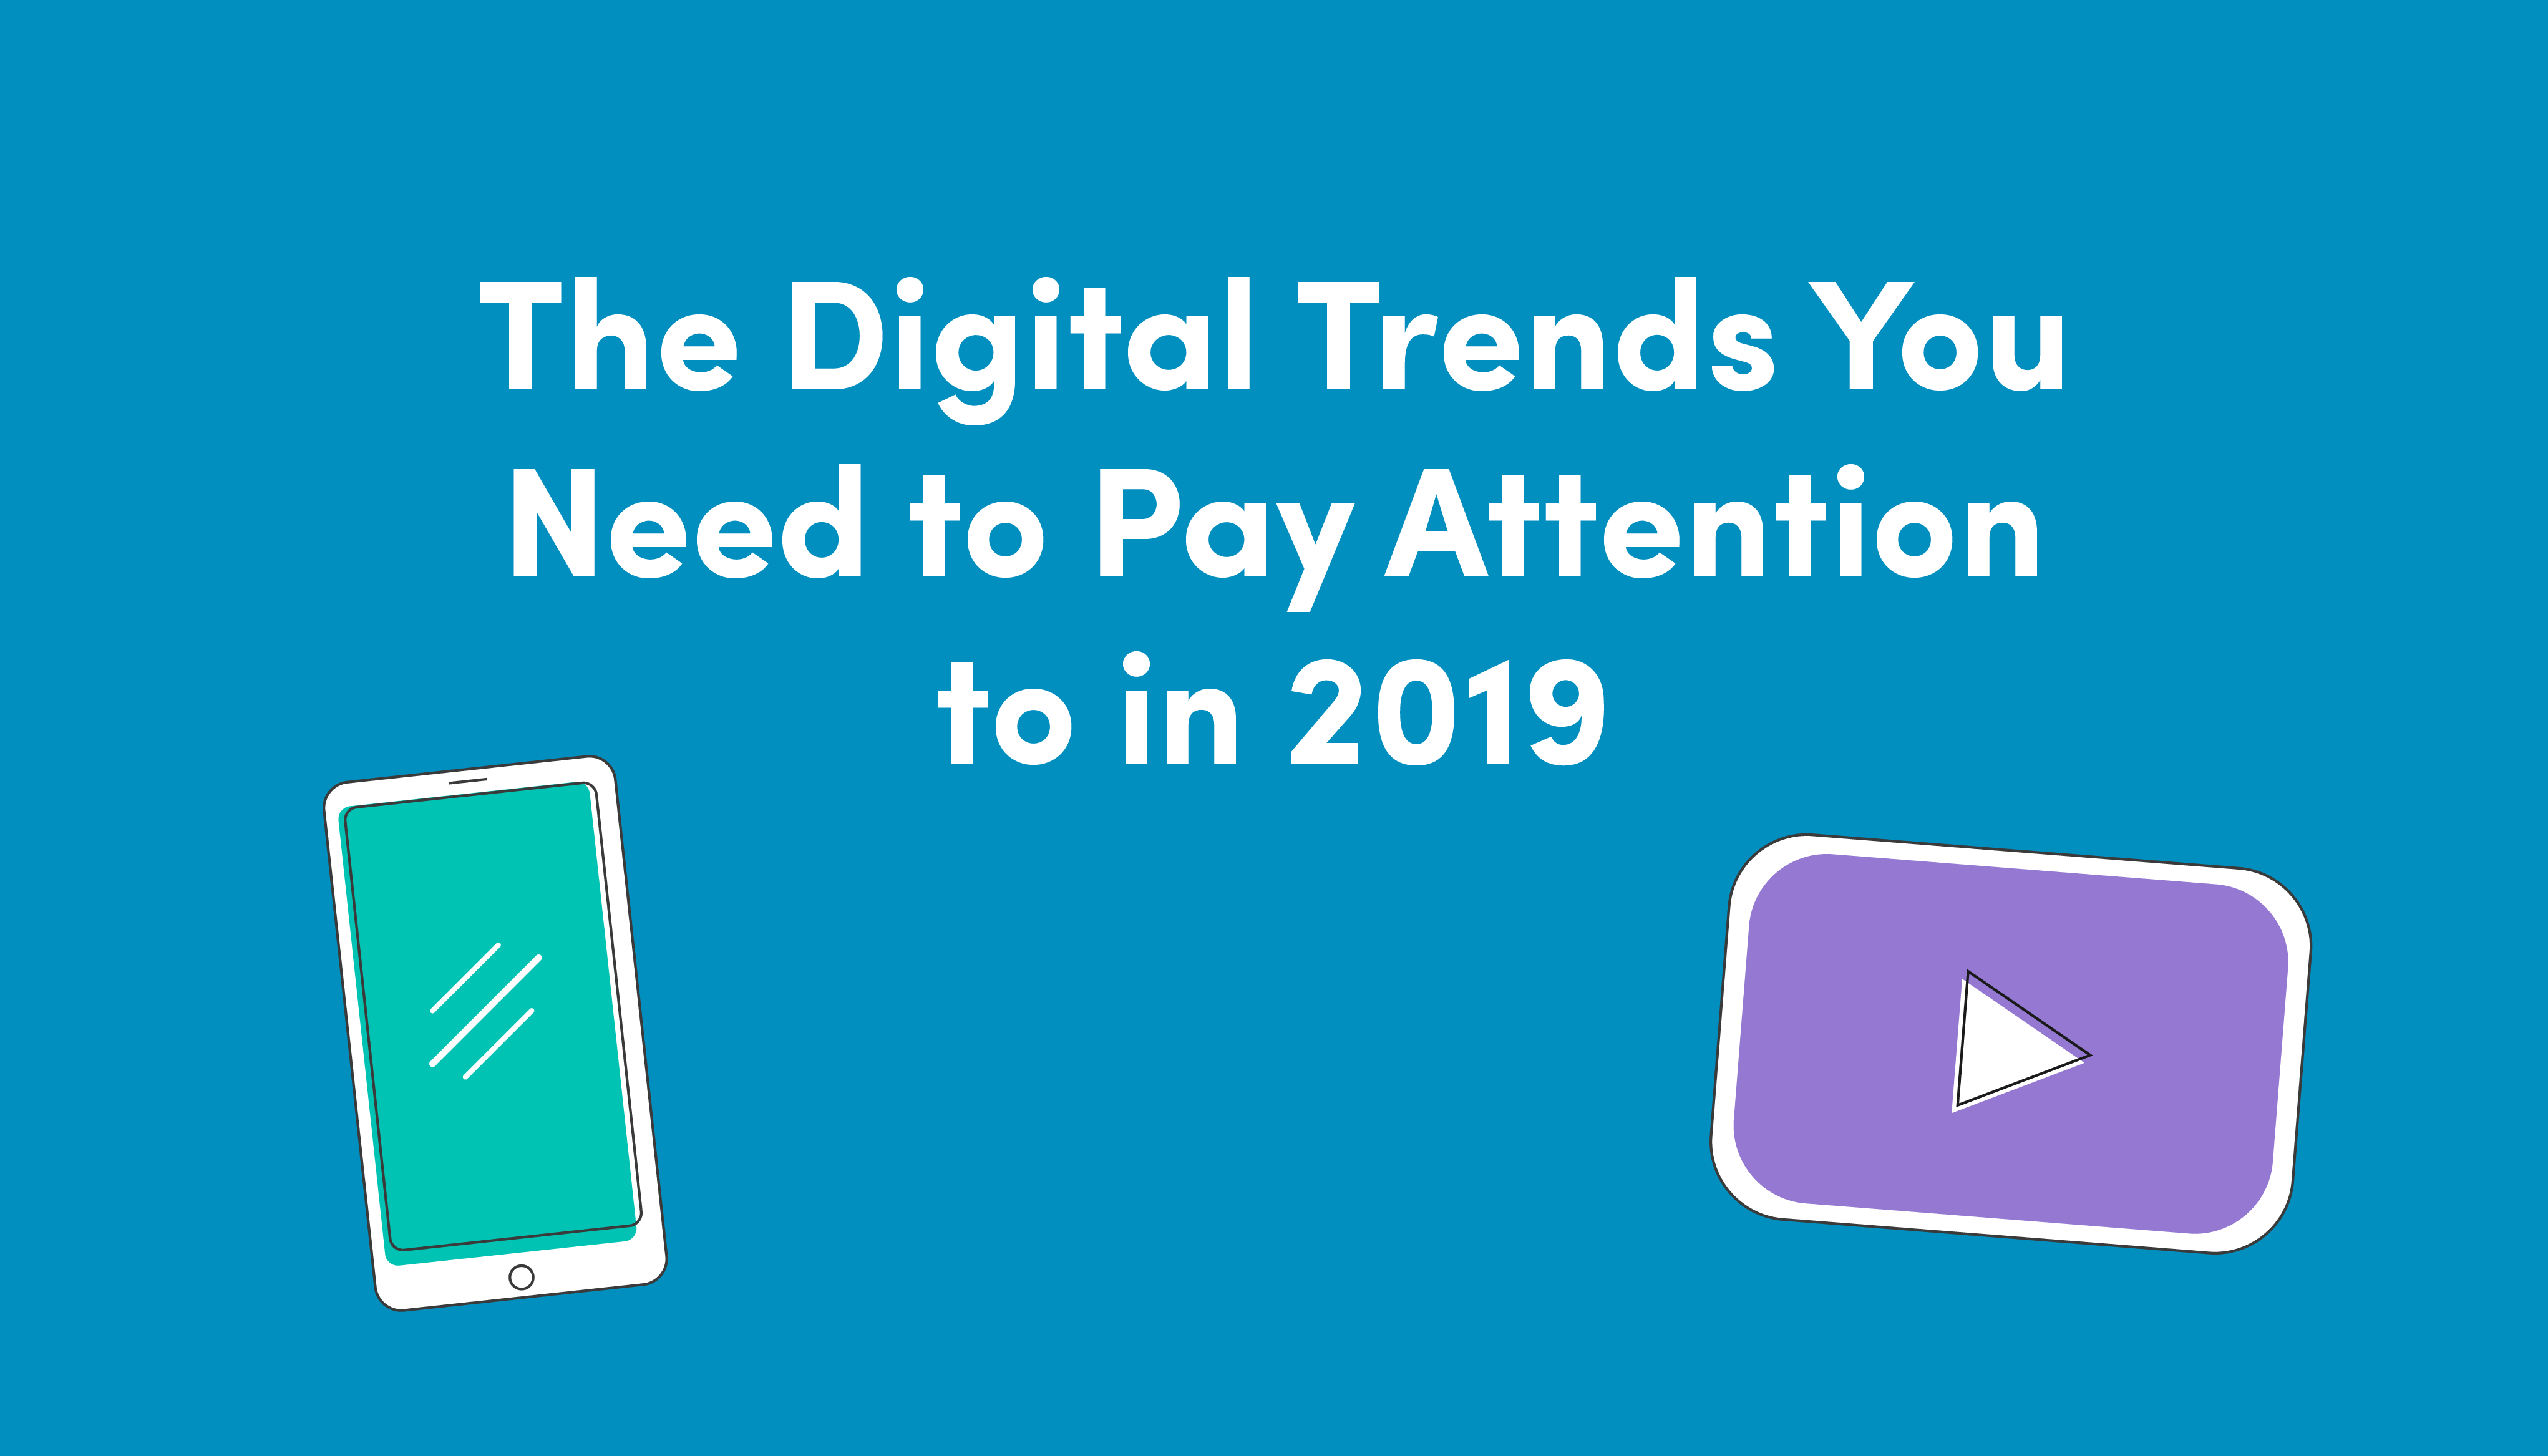 The digital trends you need to pay attention to in 2019